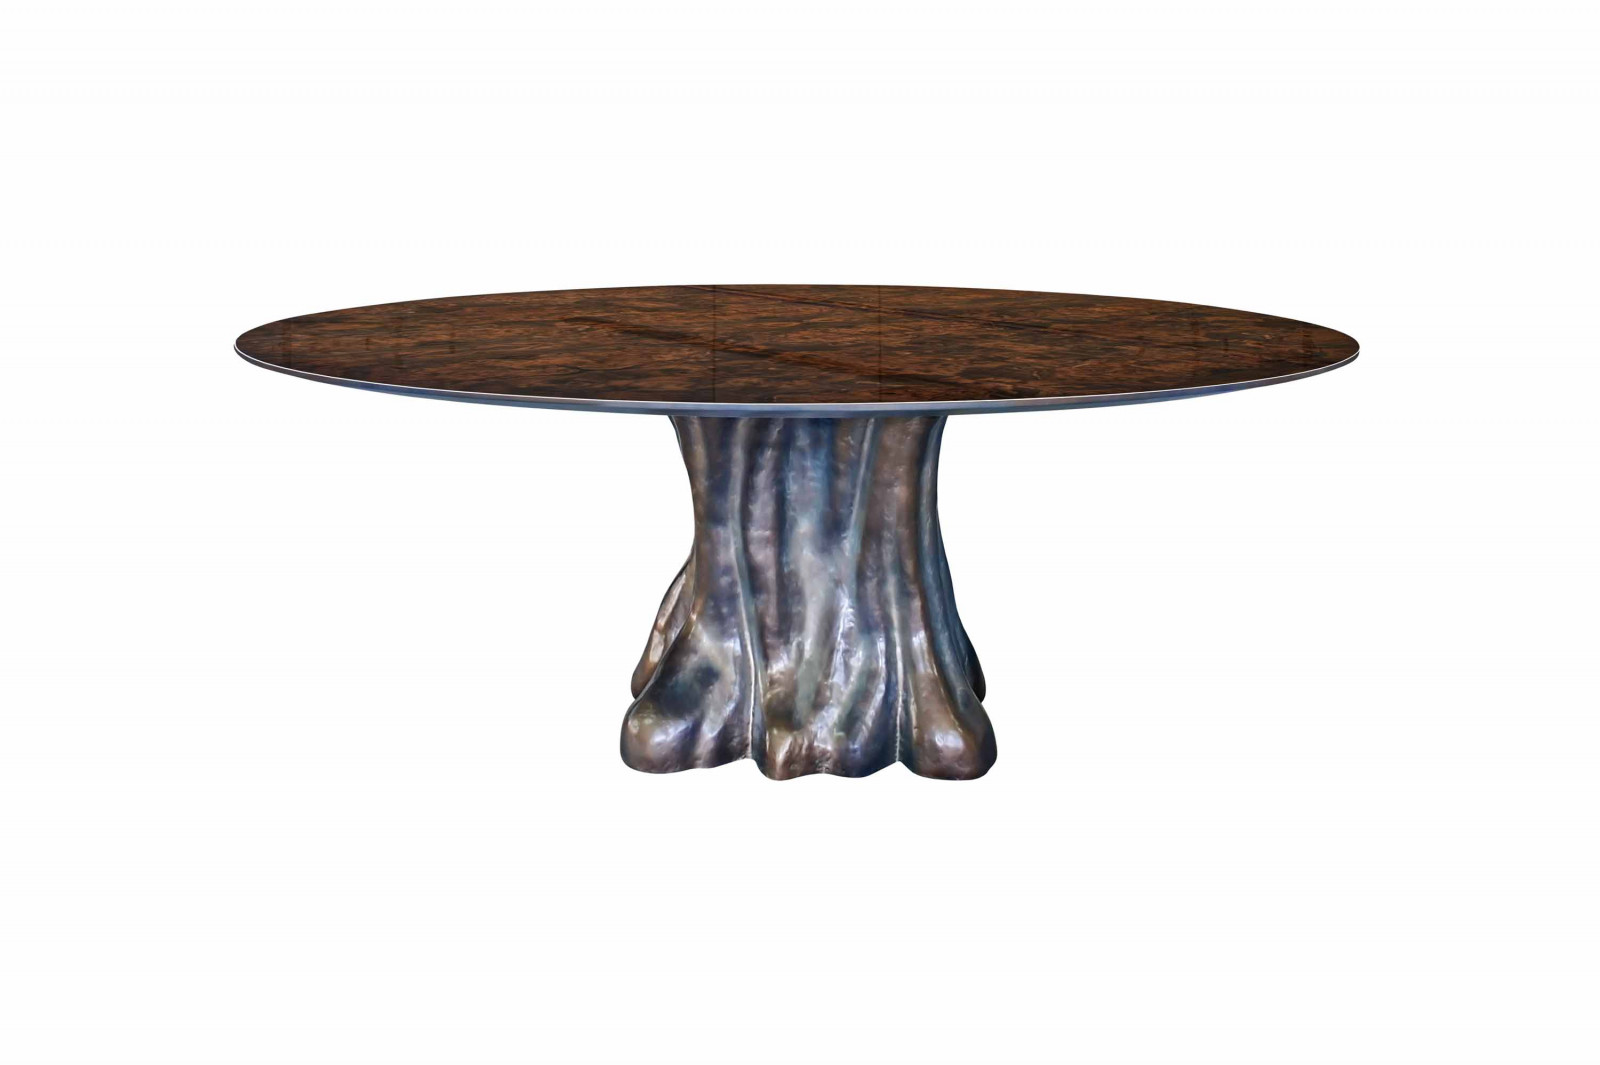 dining_table_exclusive_luxurious_sculptural_trunk_brass_walnut_root_calypso_karpa_14-1450-1600-1400-100